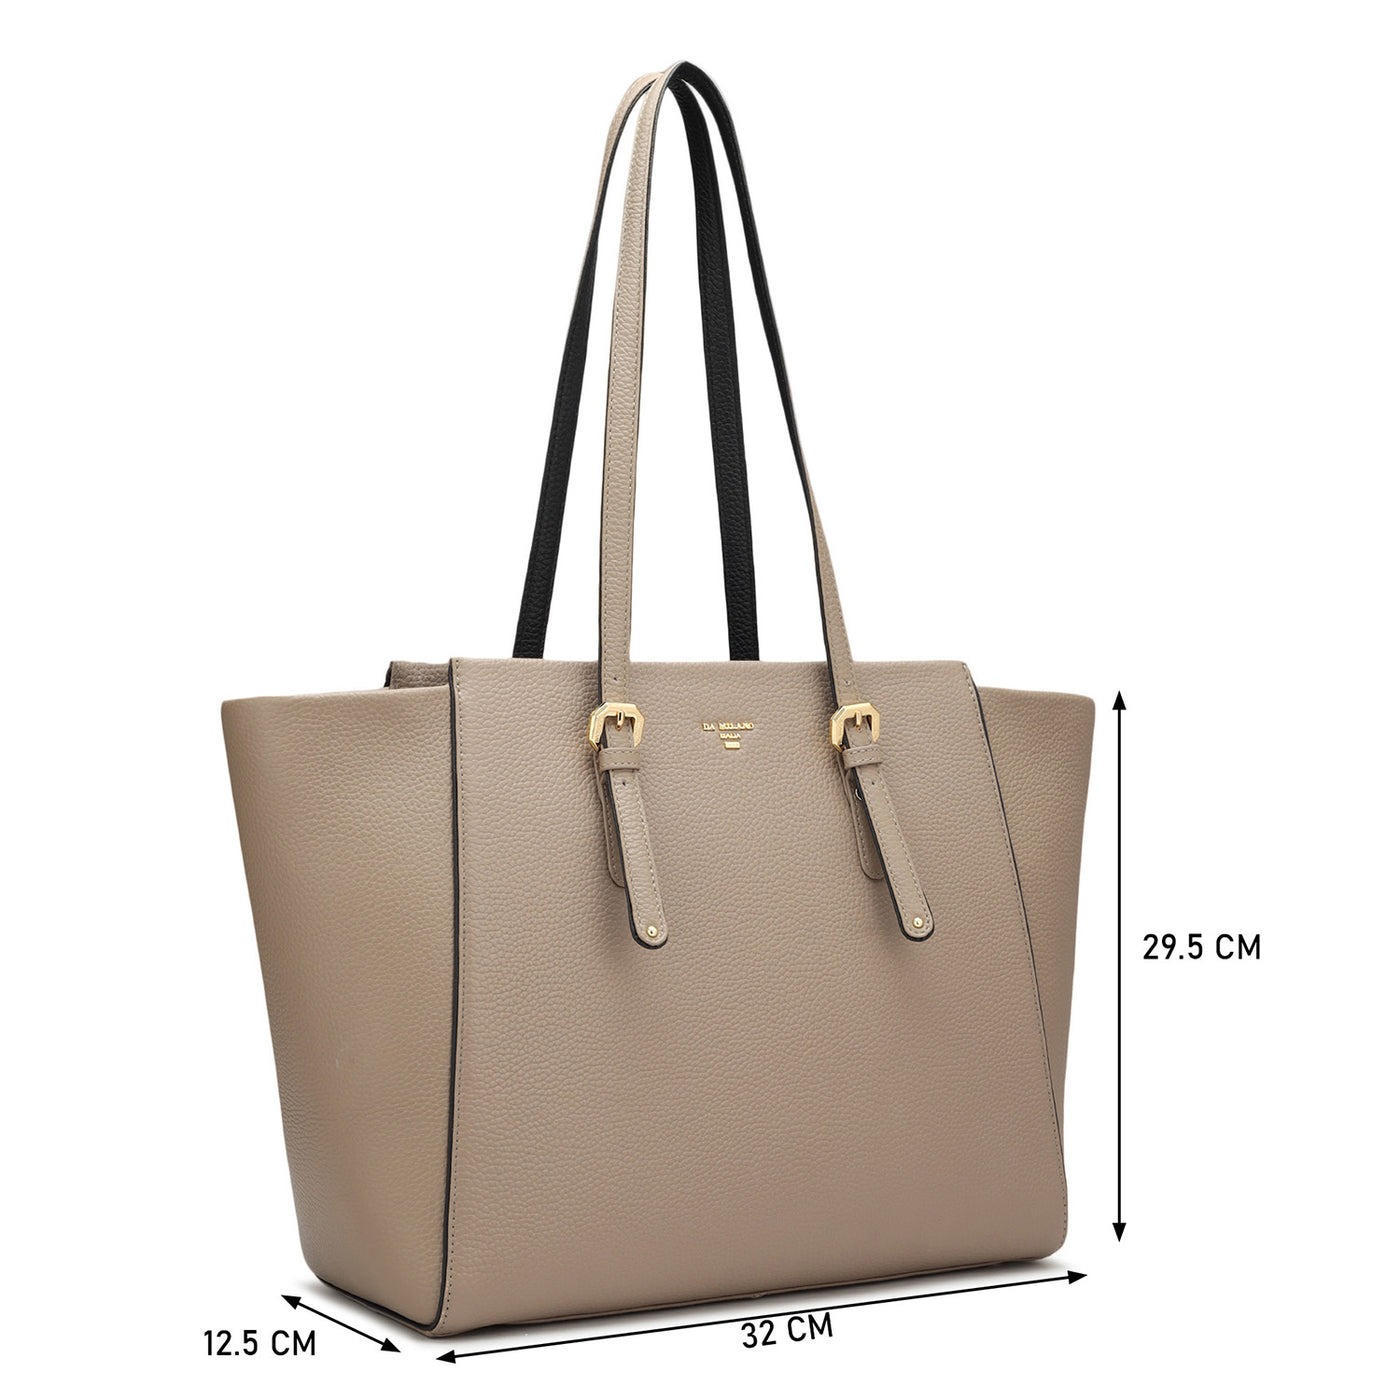 Large Wax Leather Tote - Greyish Taupe